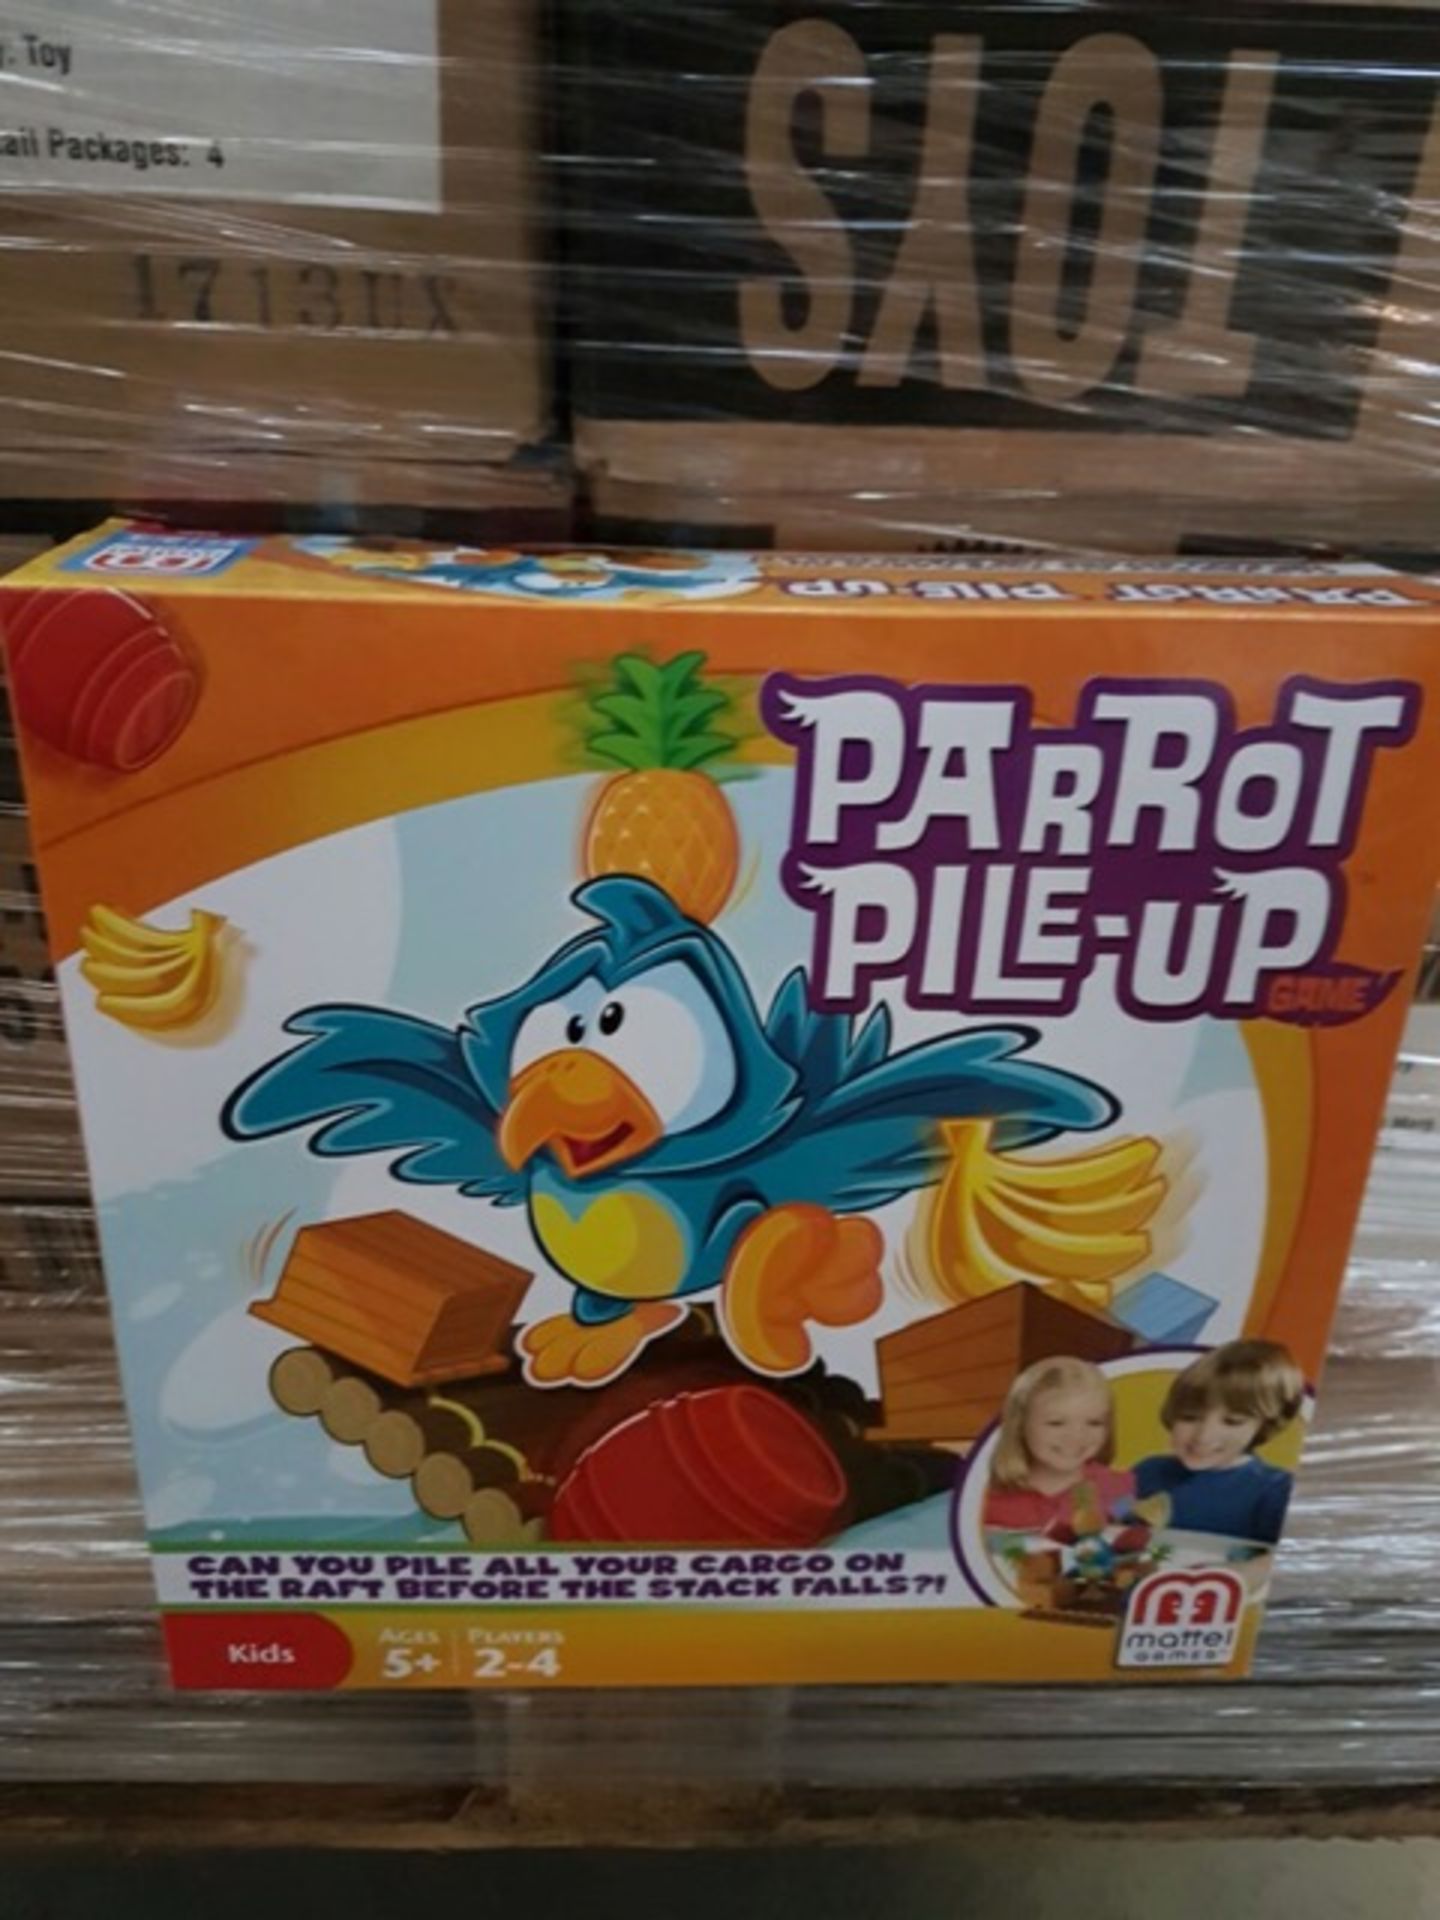 12 x Brand New Mattel Parrot Pile Up Game.